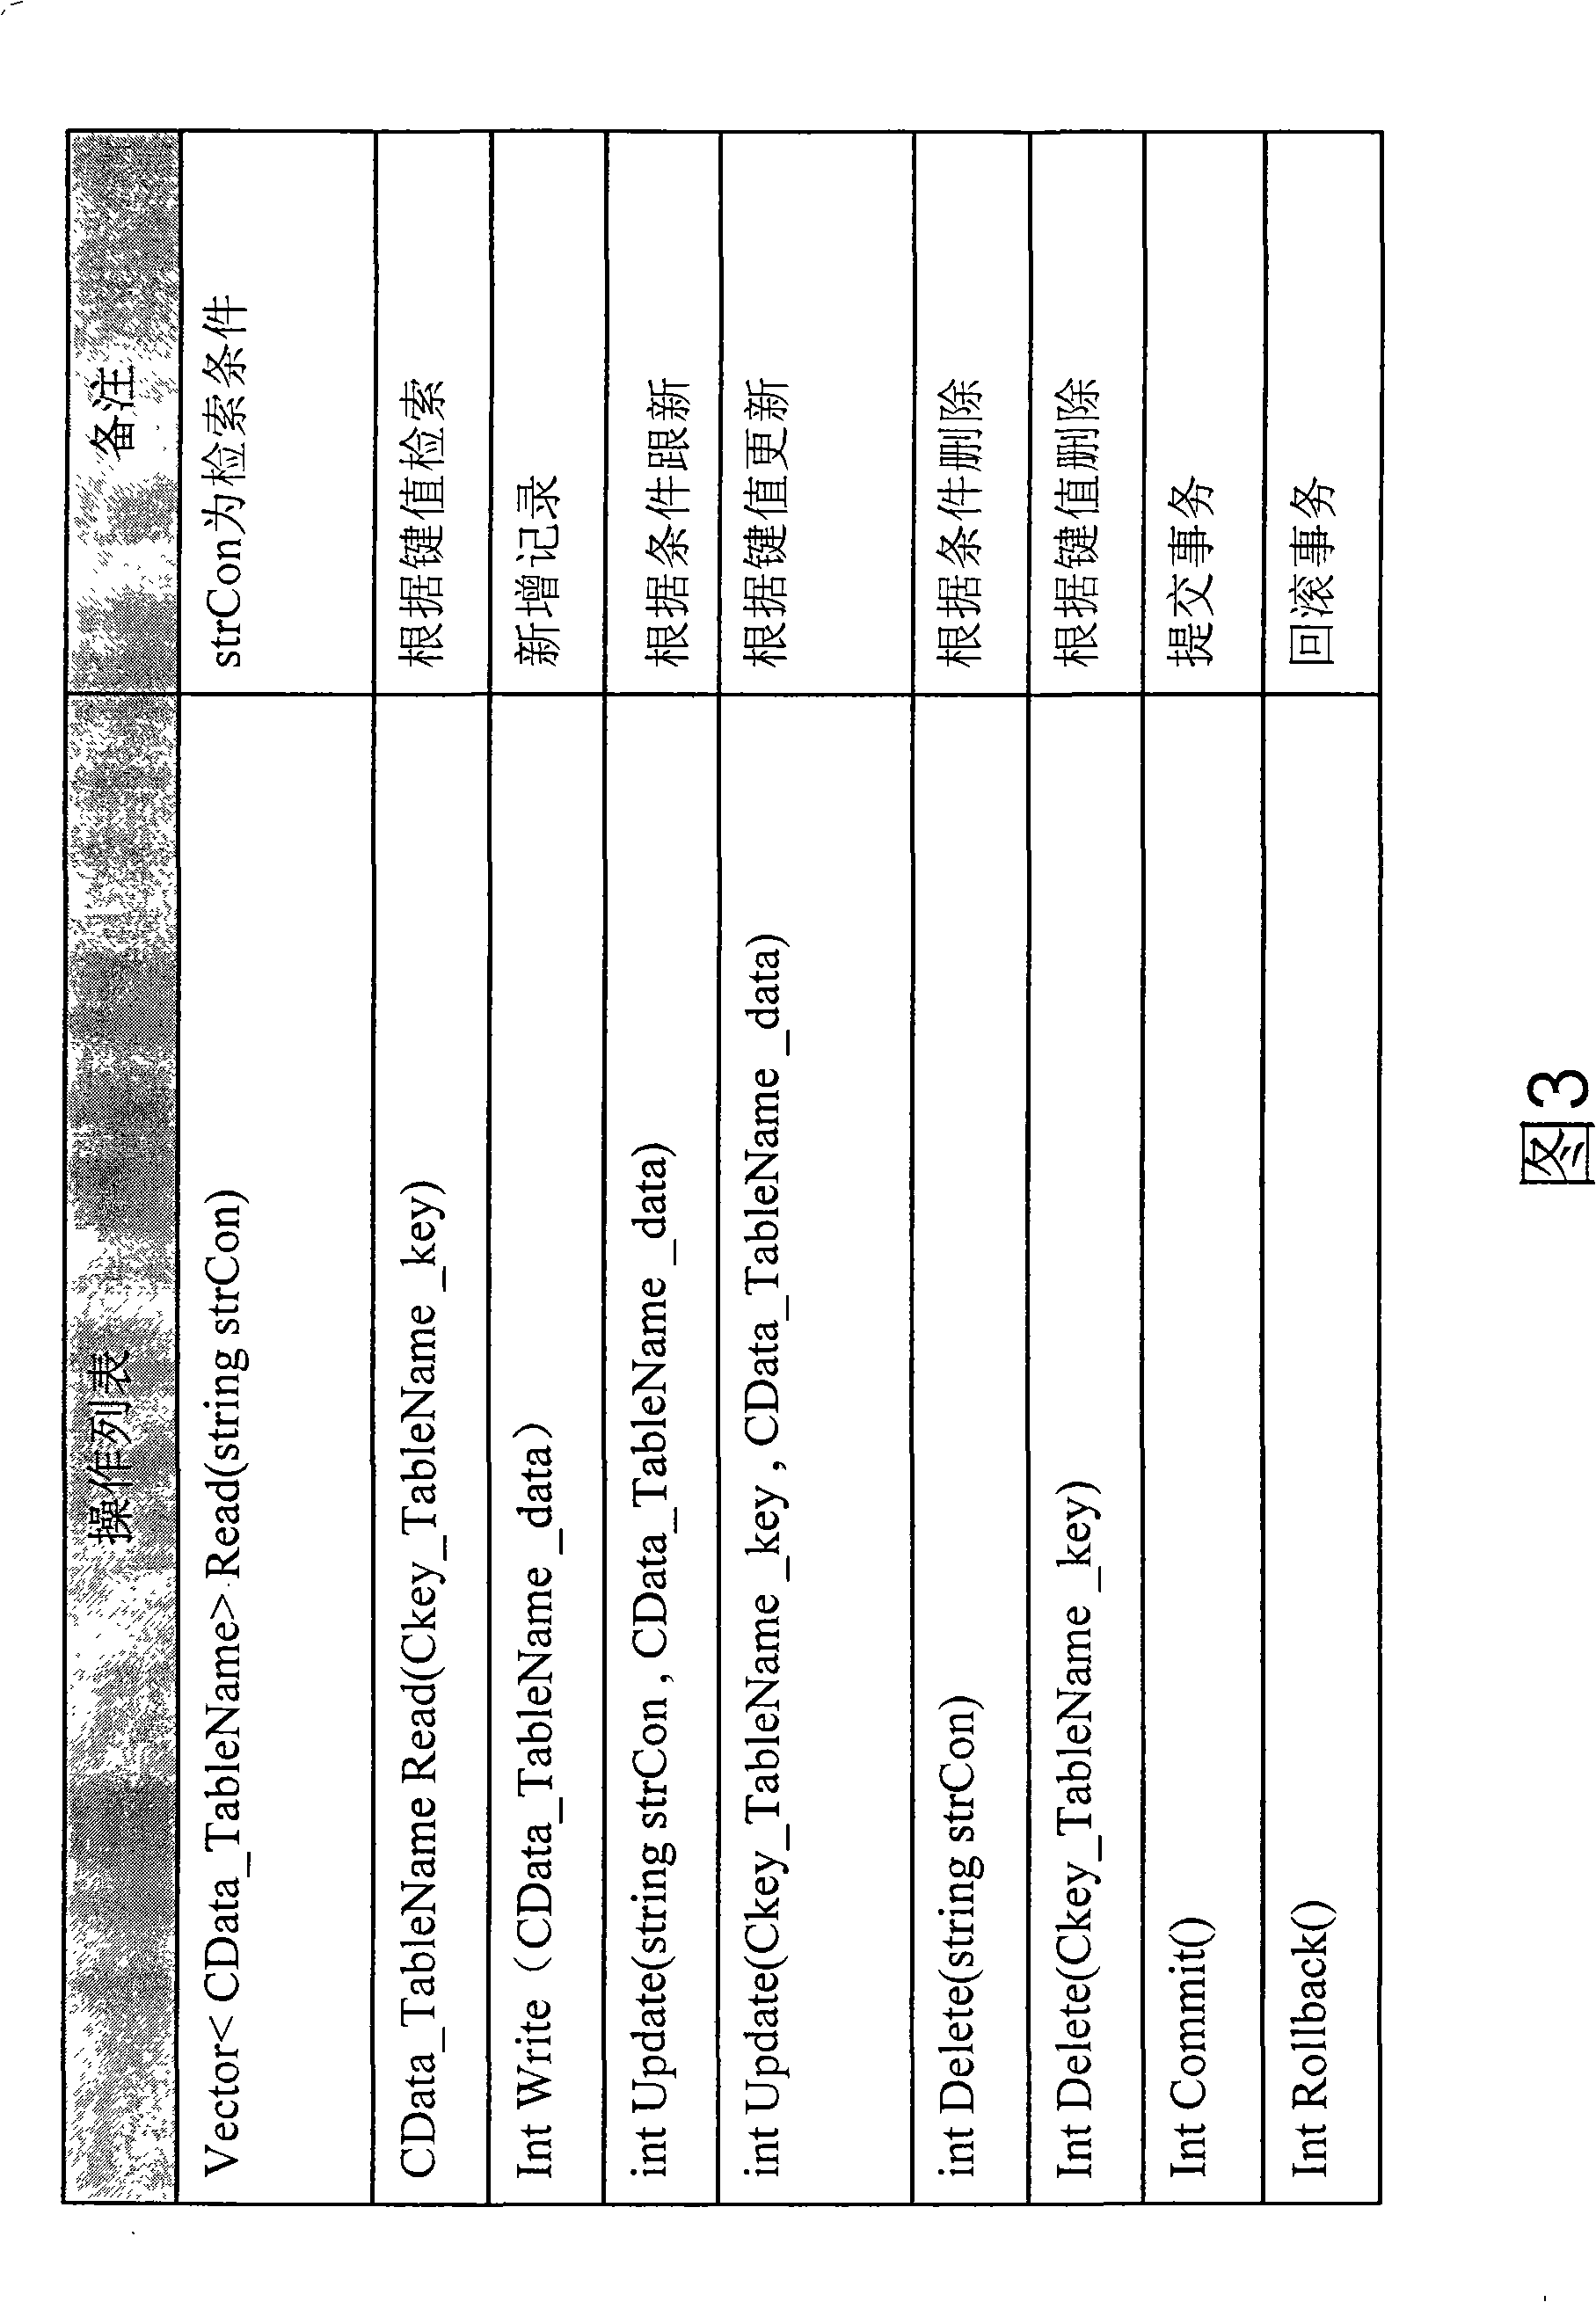 Data access method of oracle relational database based on procedure call interface